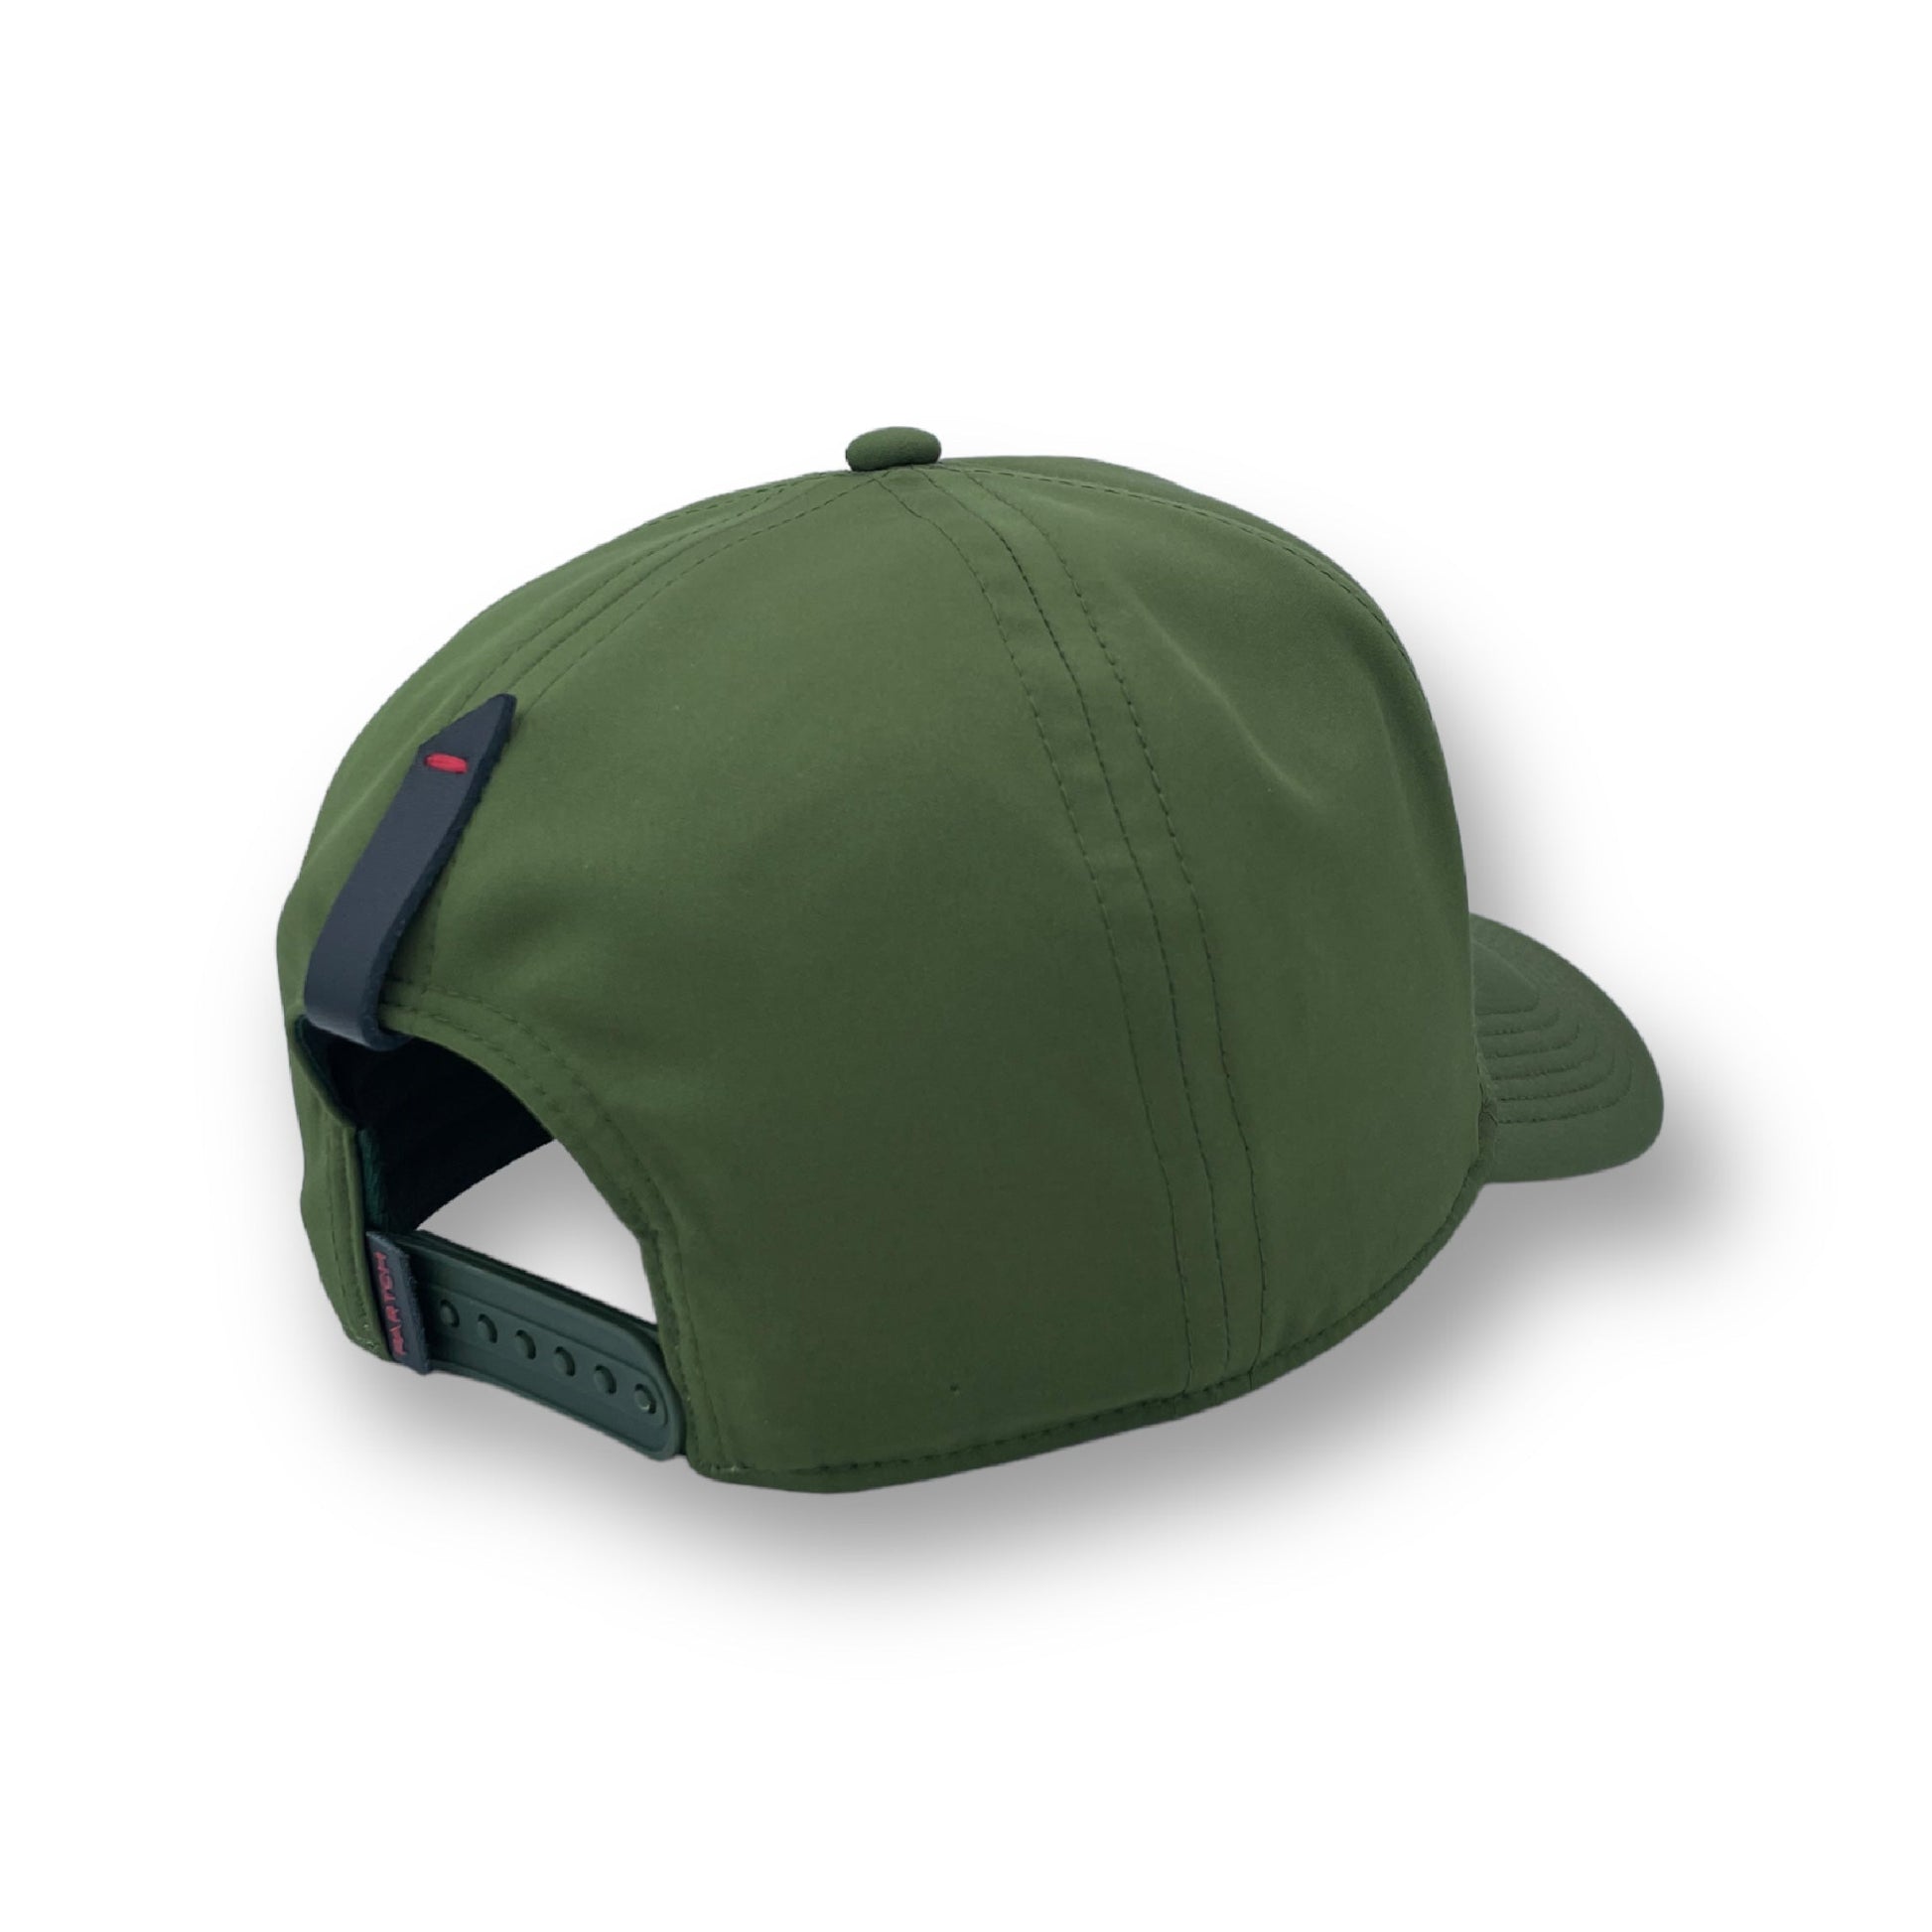 Partch trucker hat full fabric spandex side view